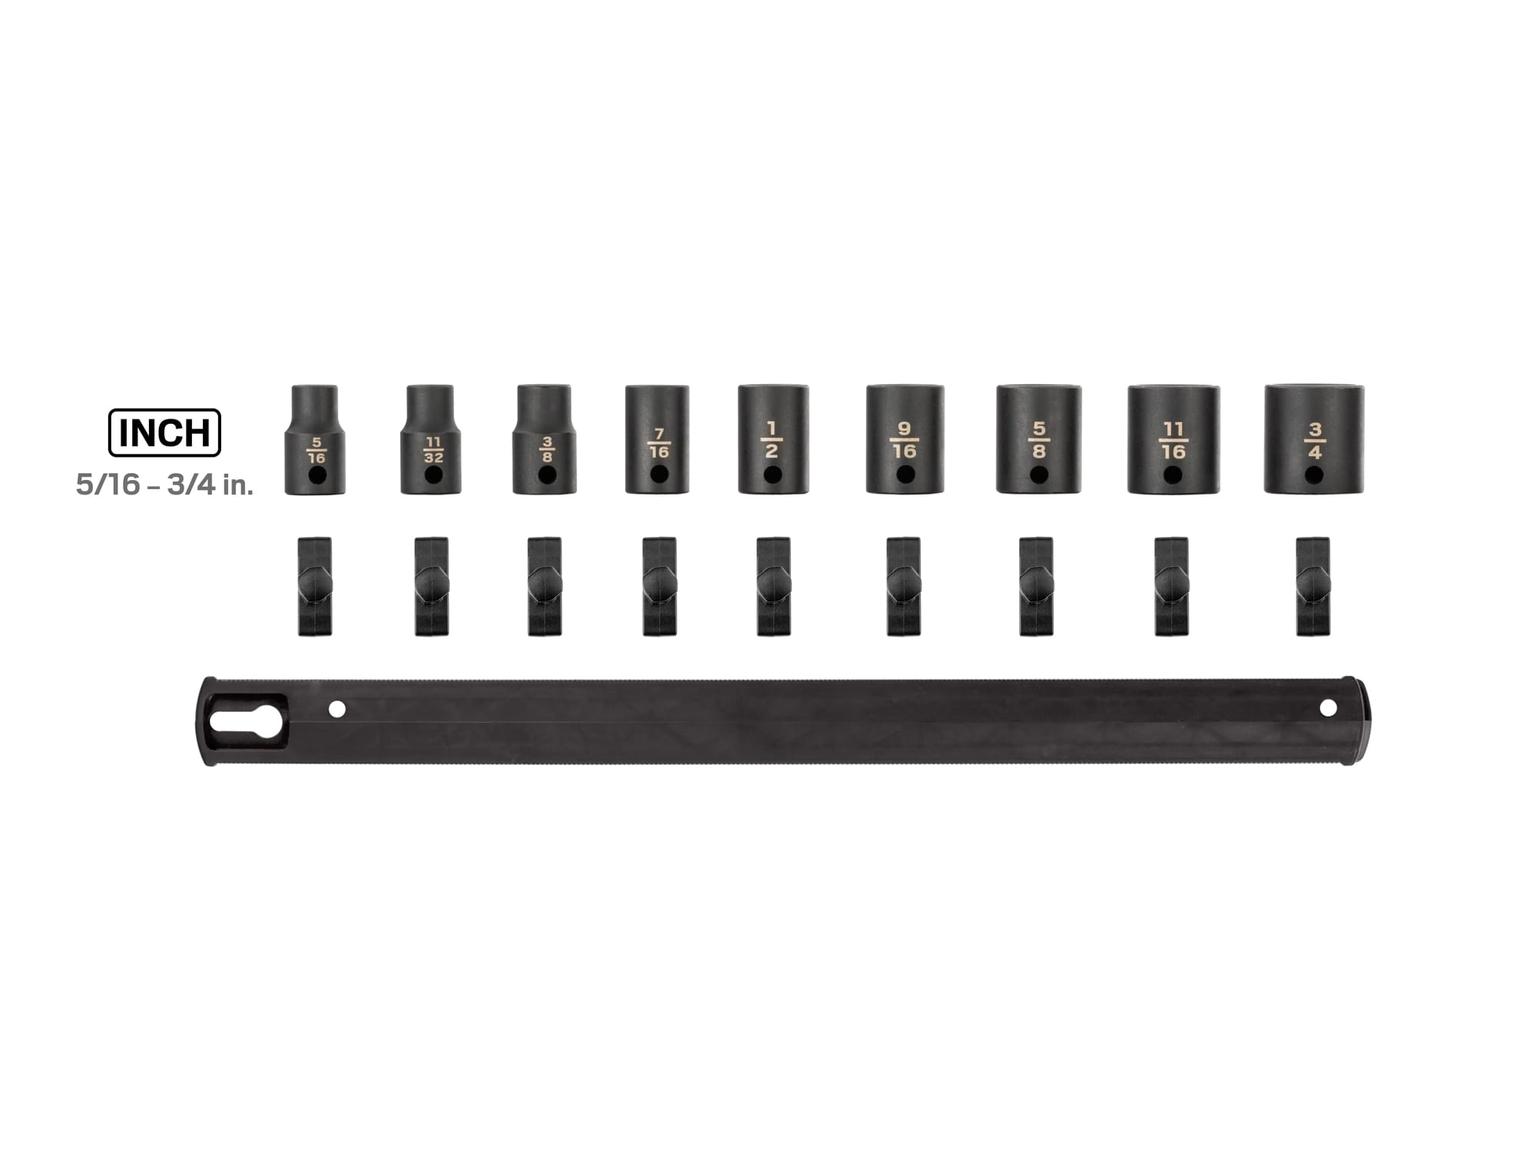 TEKTON SID91100-T 3/8 Inch Drive 6-Point Impact Socket Set with Rail, 9-Piece (5/16-3/4 in.)